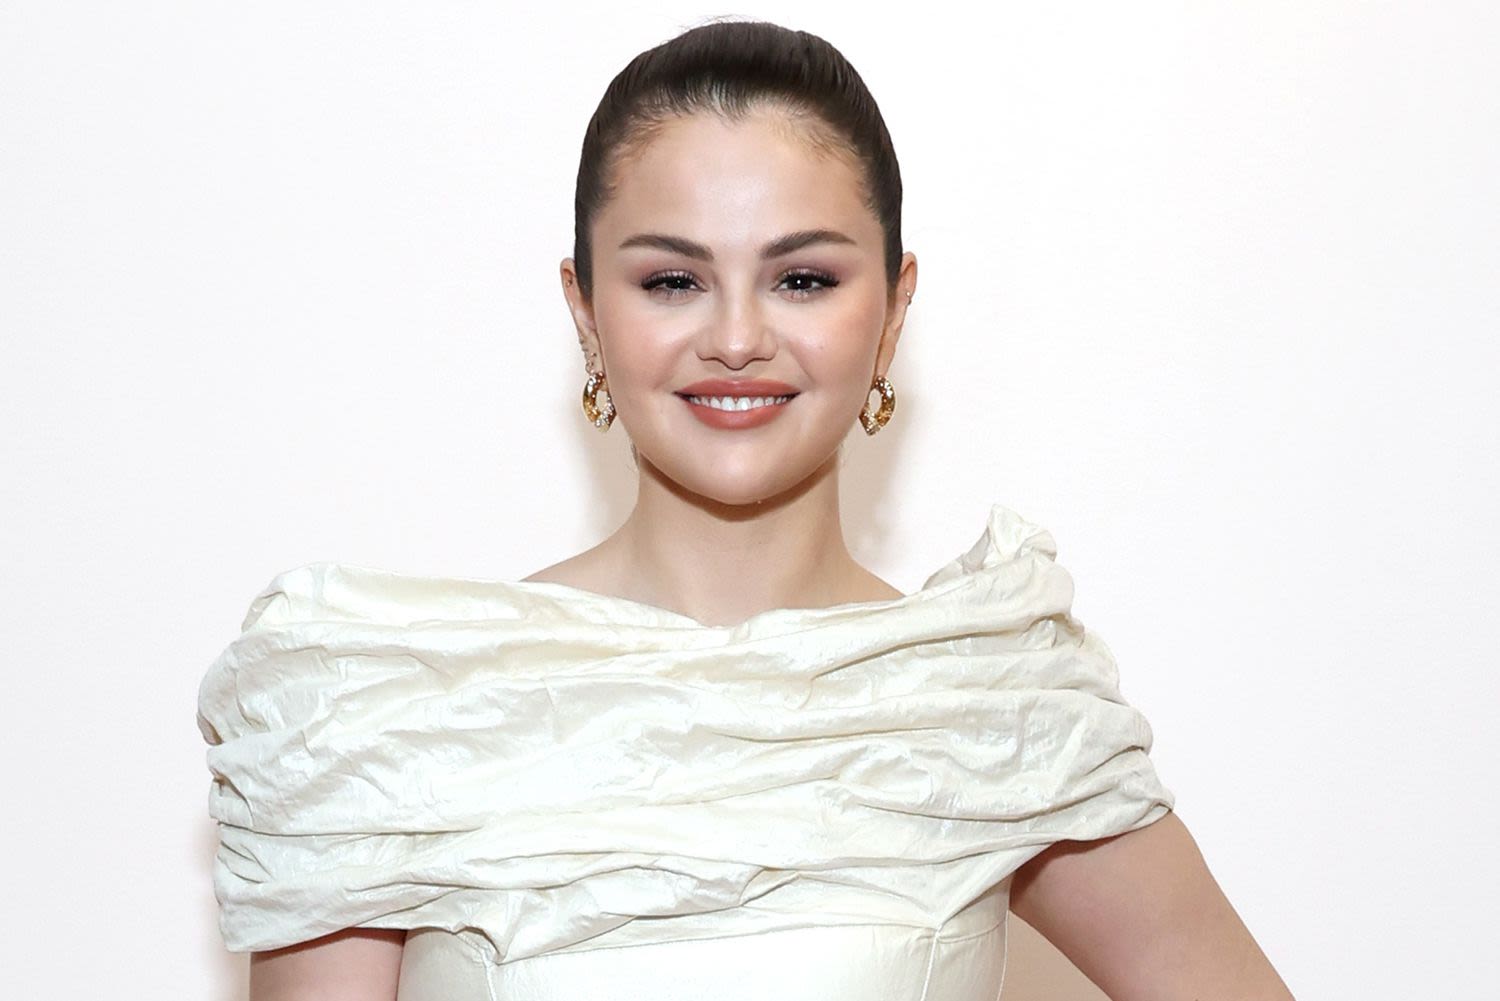 Selena Gomez Reflects on How Mental Health ‘Means So Much’ at Rare Beauty Summit